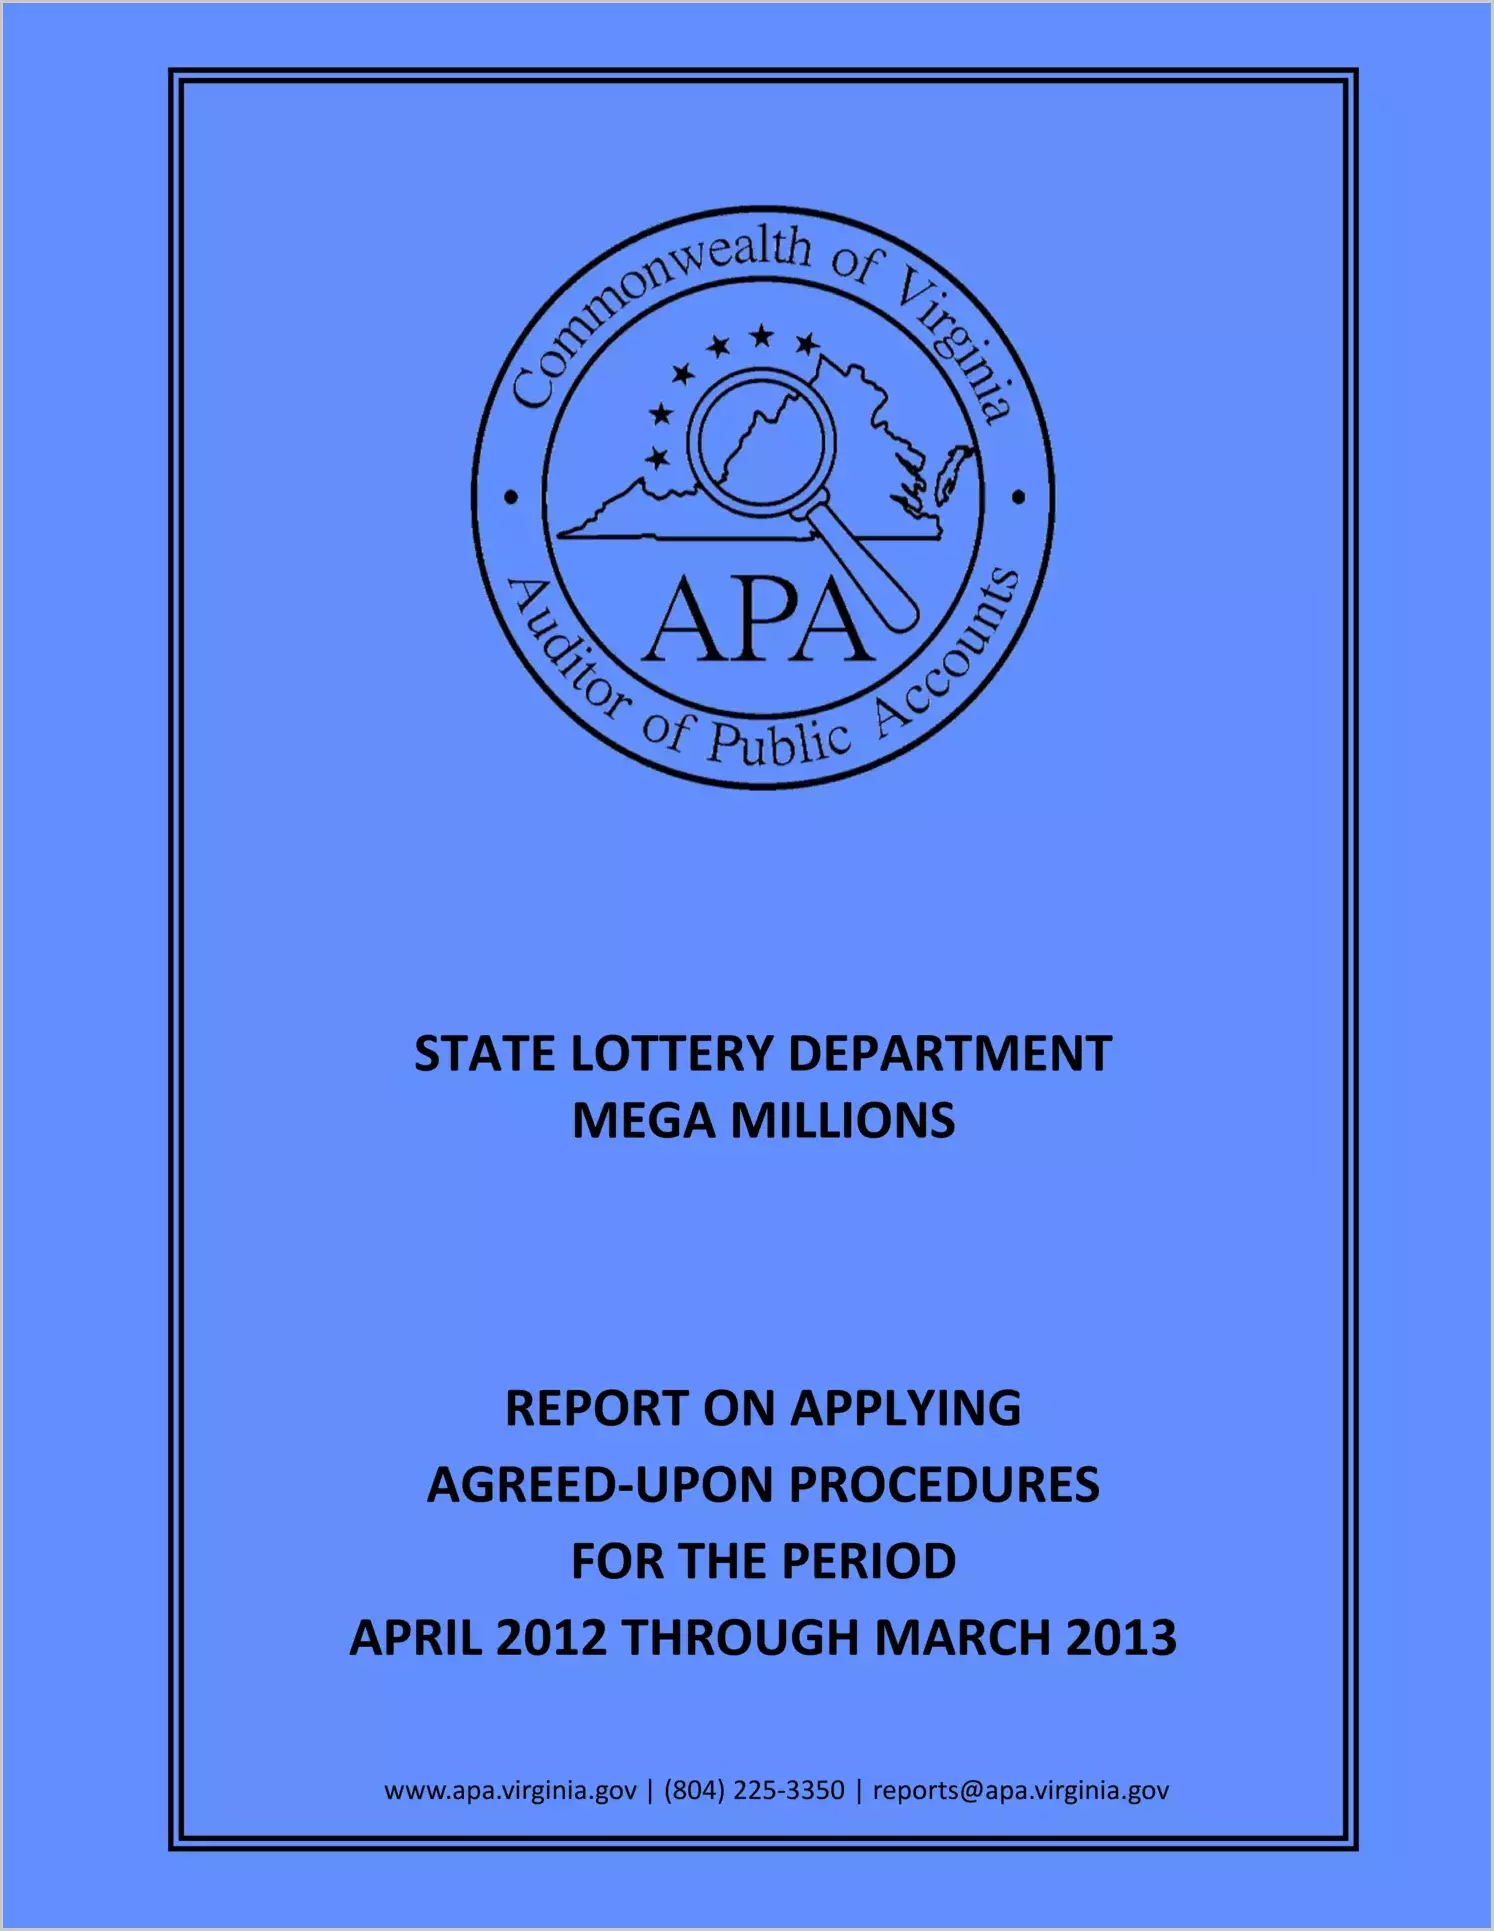 State Lottery Department Mega Millions report on Applying Agreed-Upon Procedures for the period April, 2012 through March, 2013